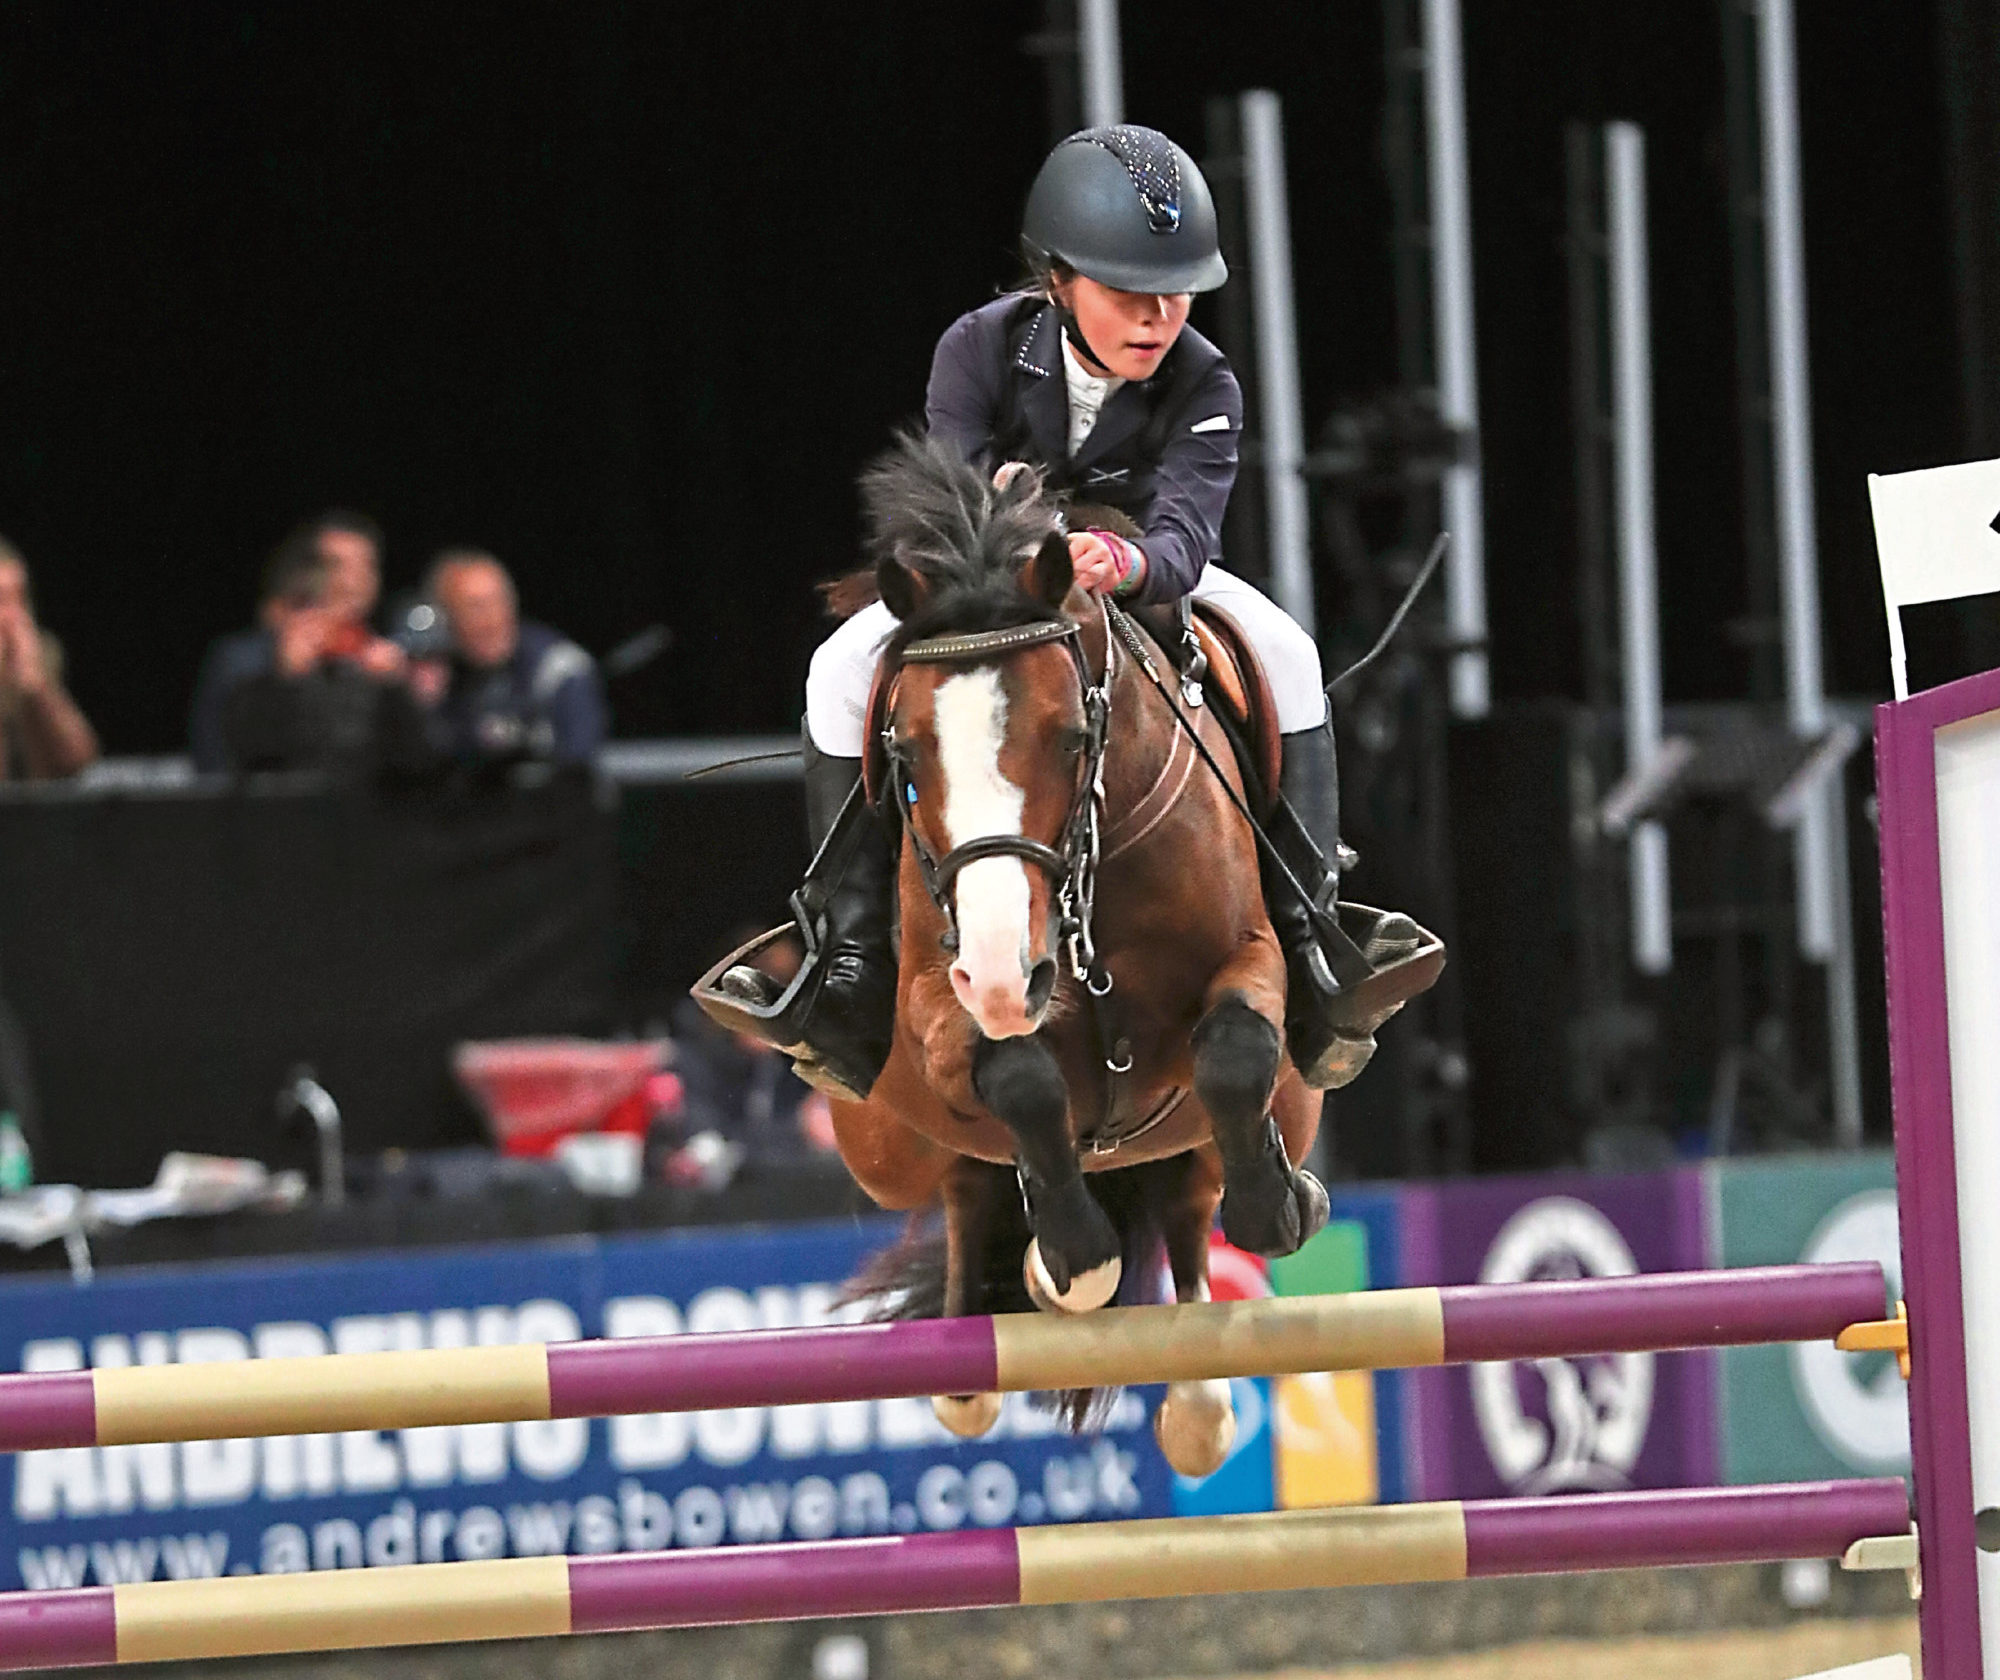 Millie Lawson riding Hary at HOYS. Credit: 1st Class Images